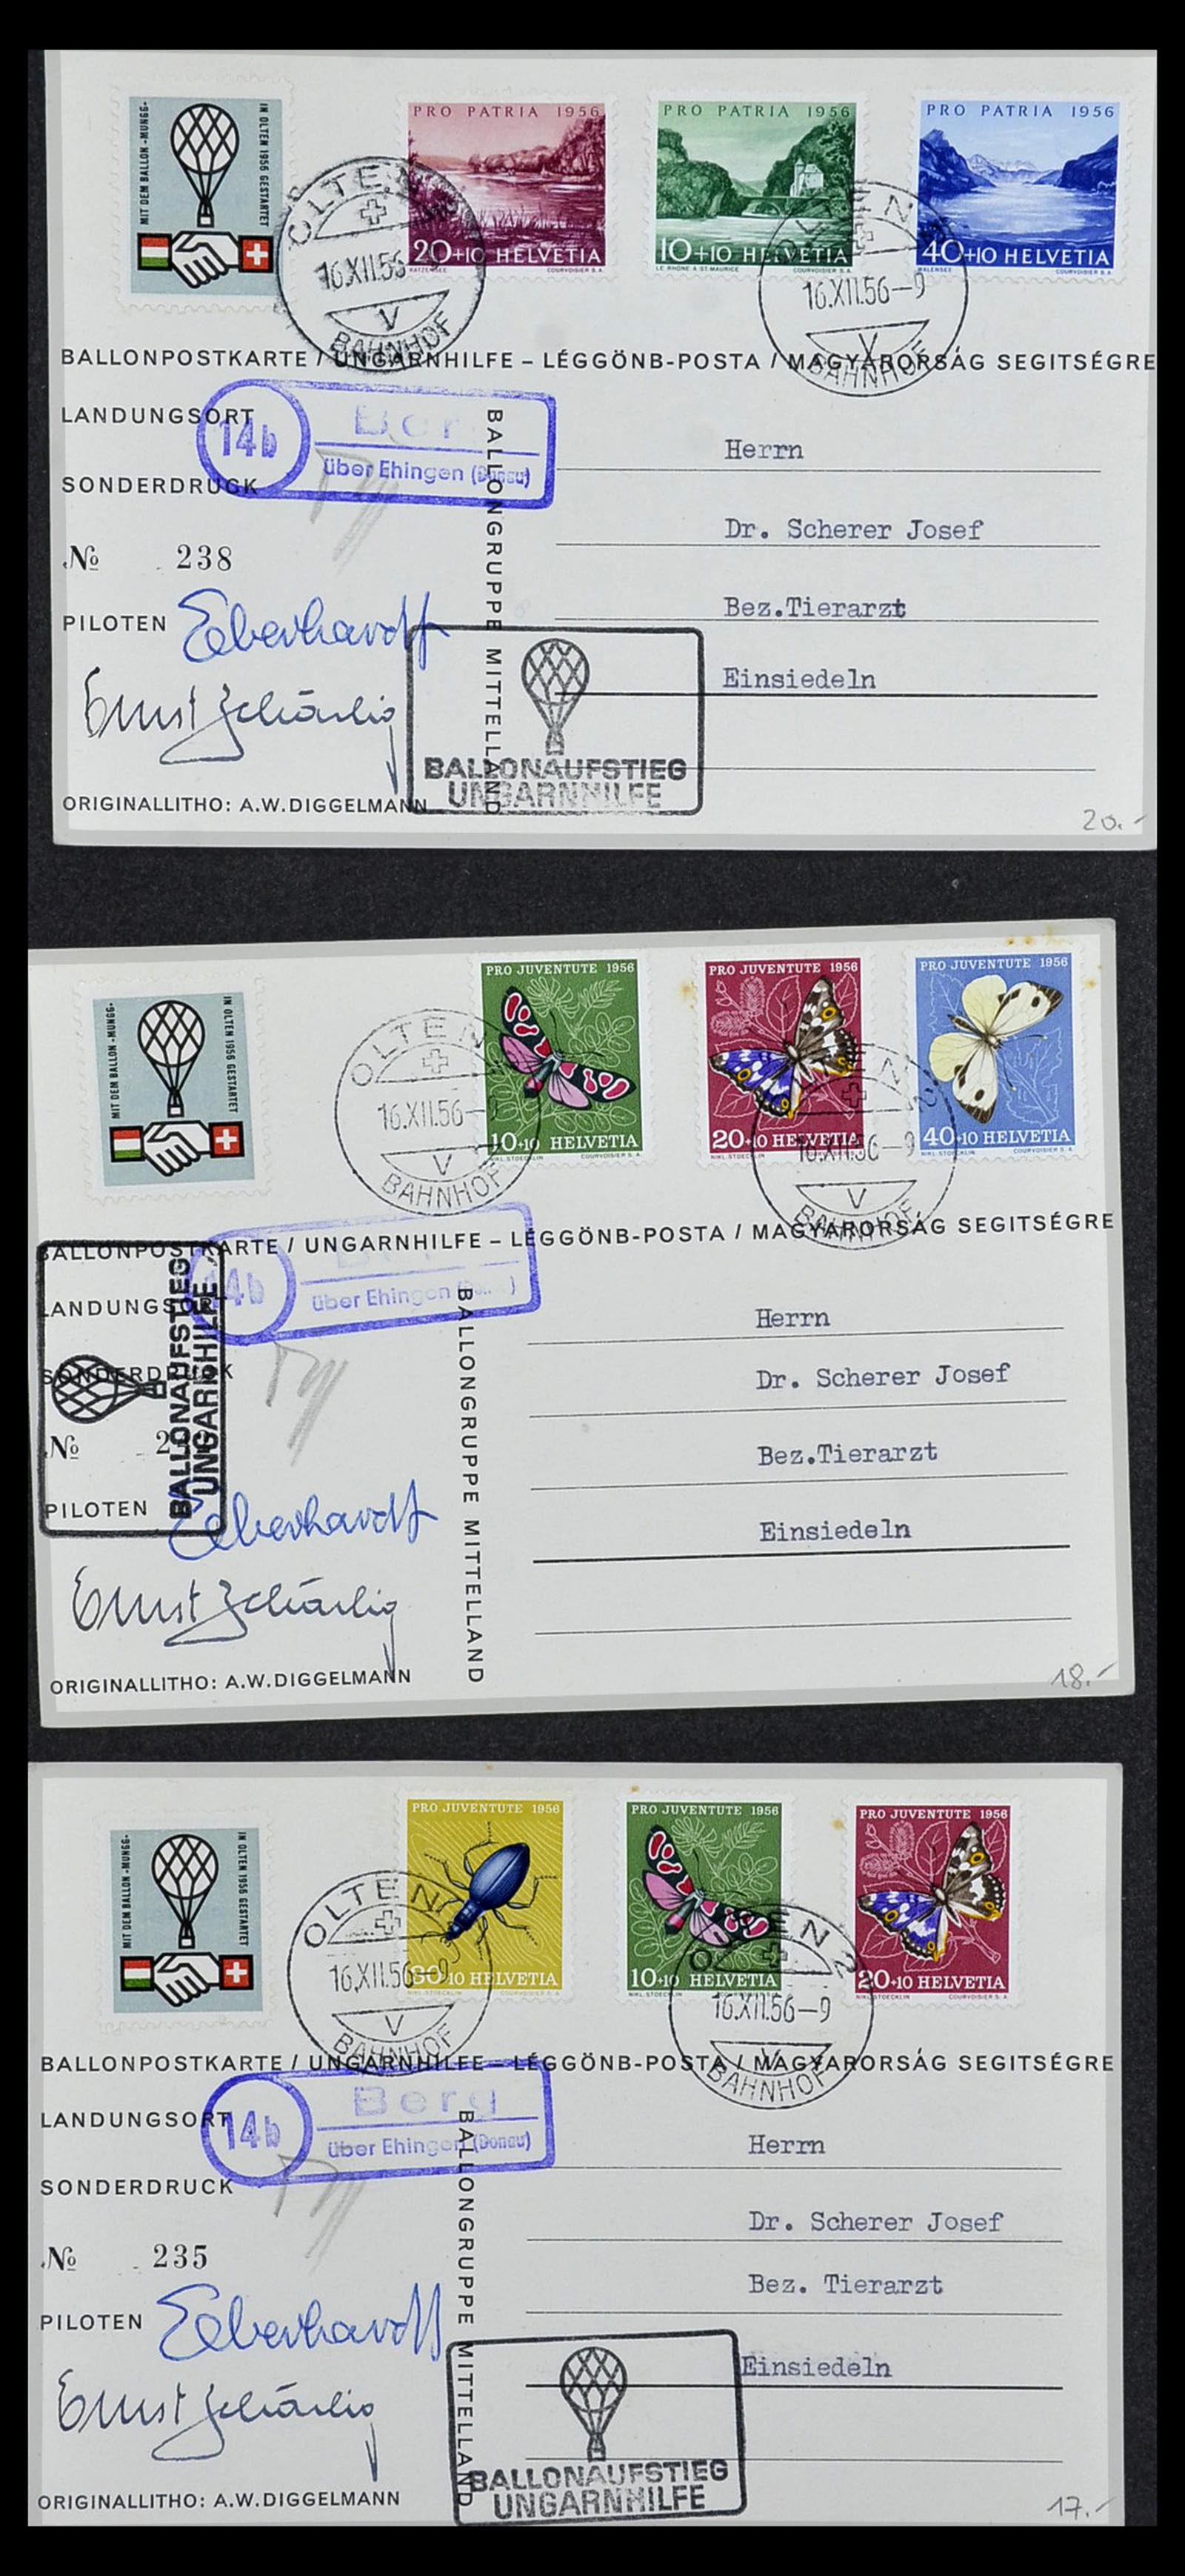 34141 002 - Stamp collection 34141 Switzerland airmail covers 1920-1960.